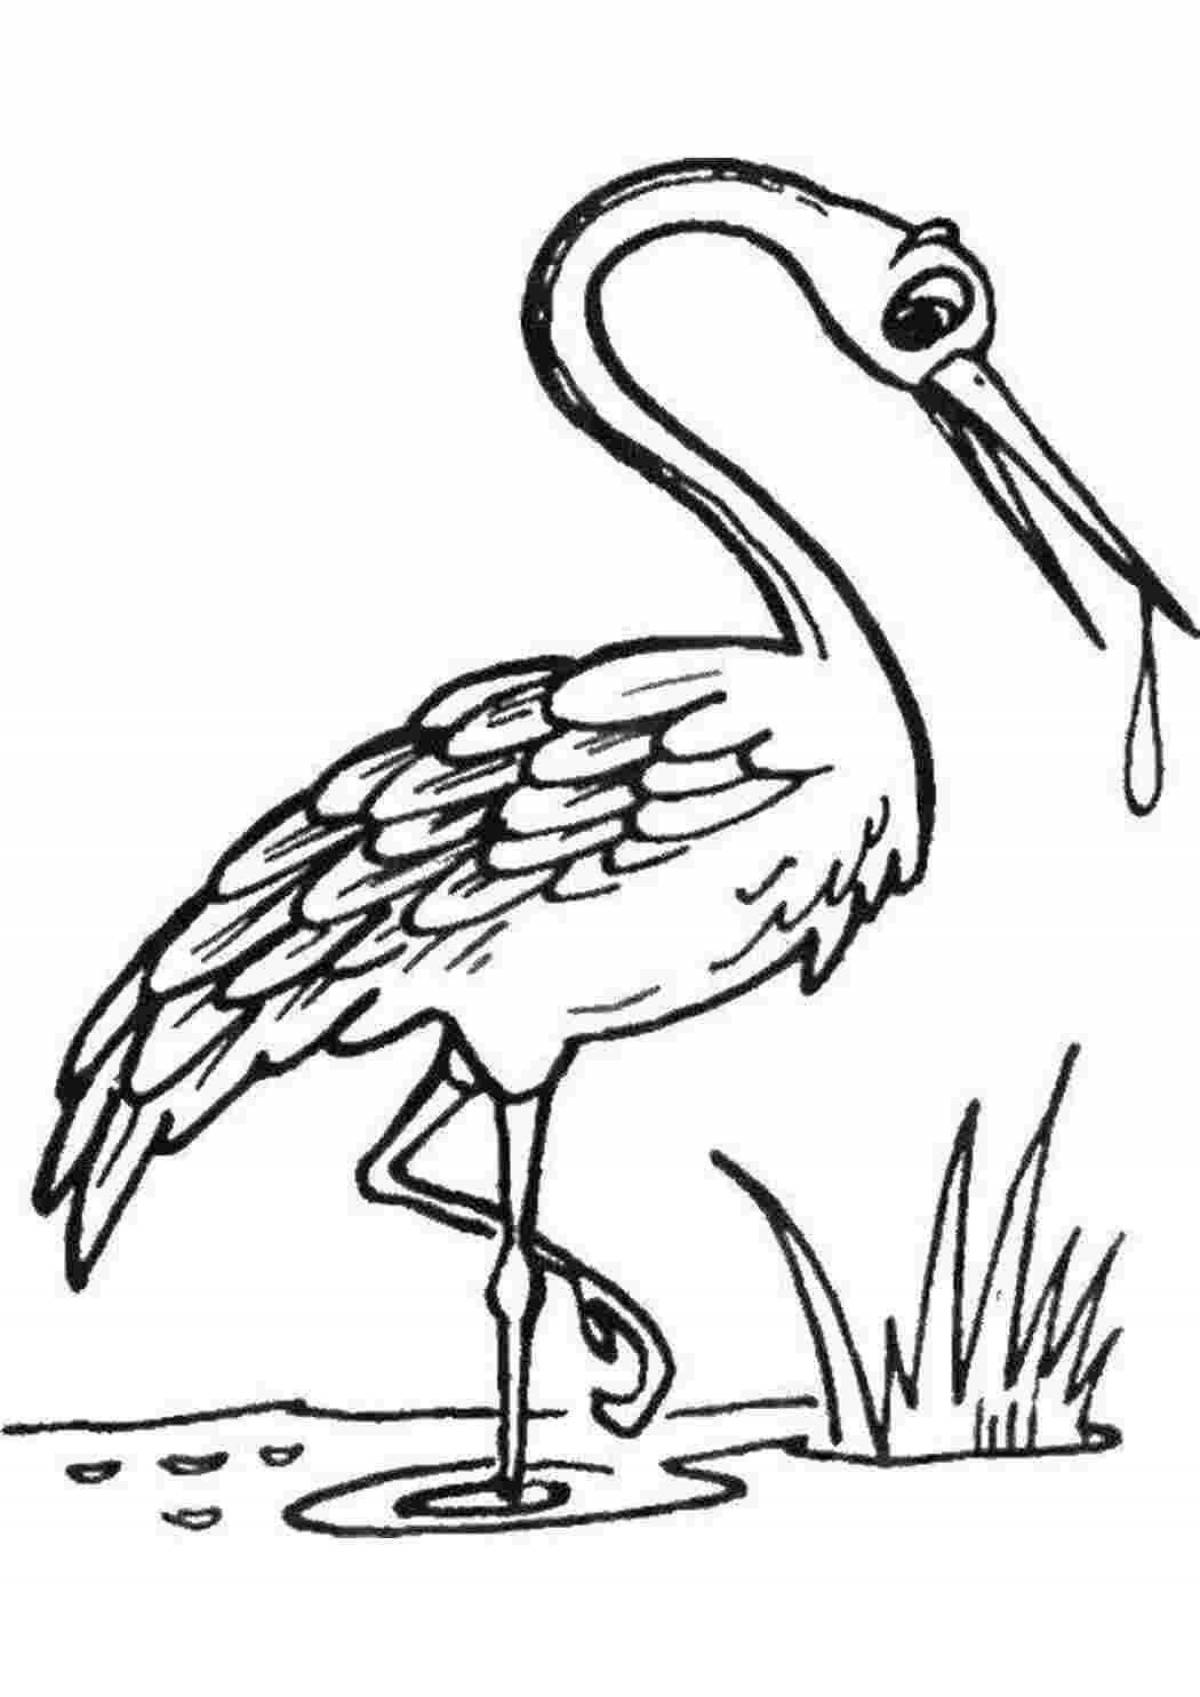 Coloring book cheerful crane for children